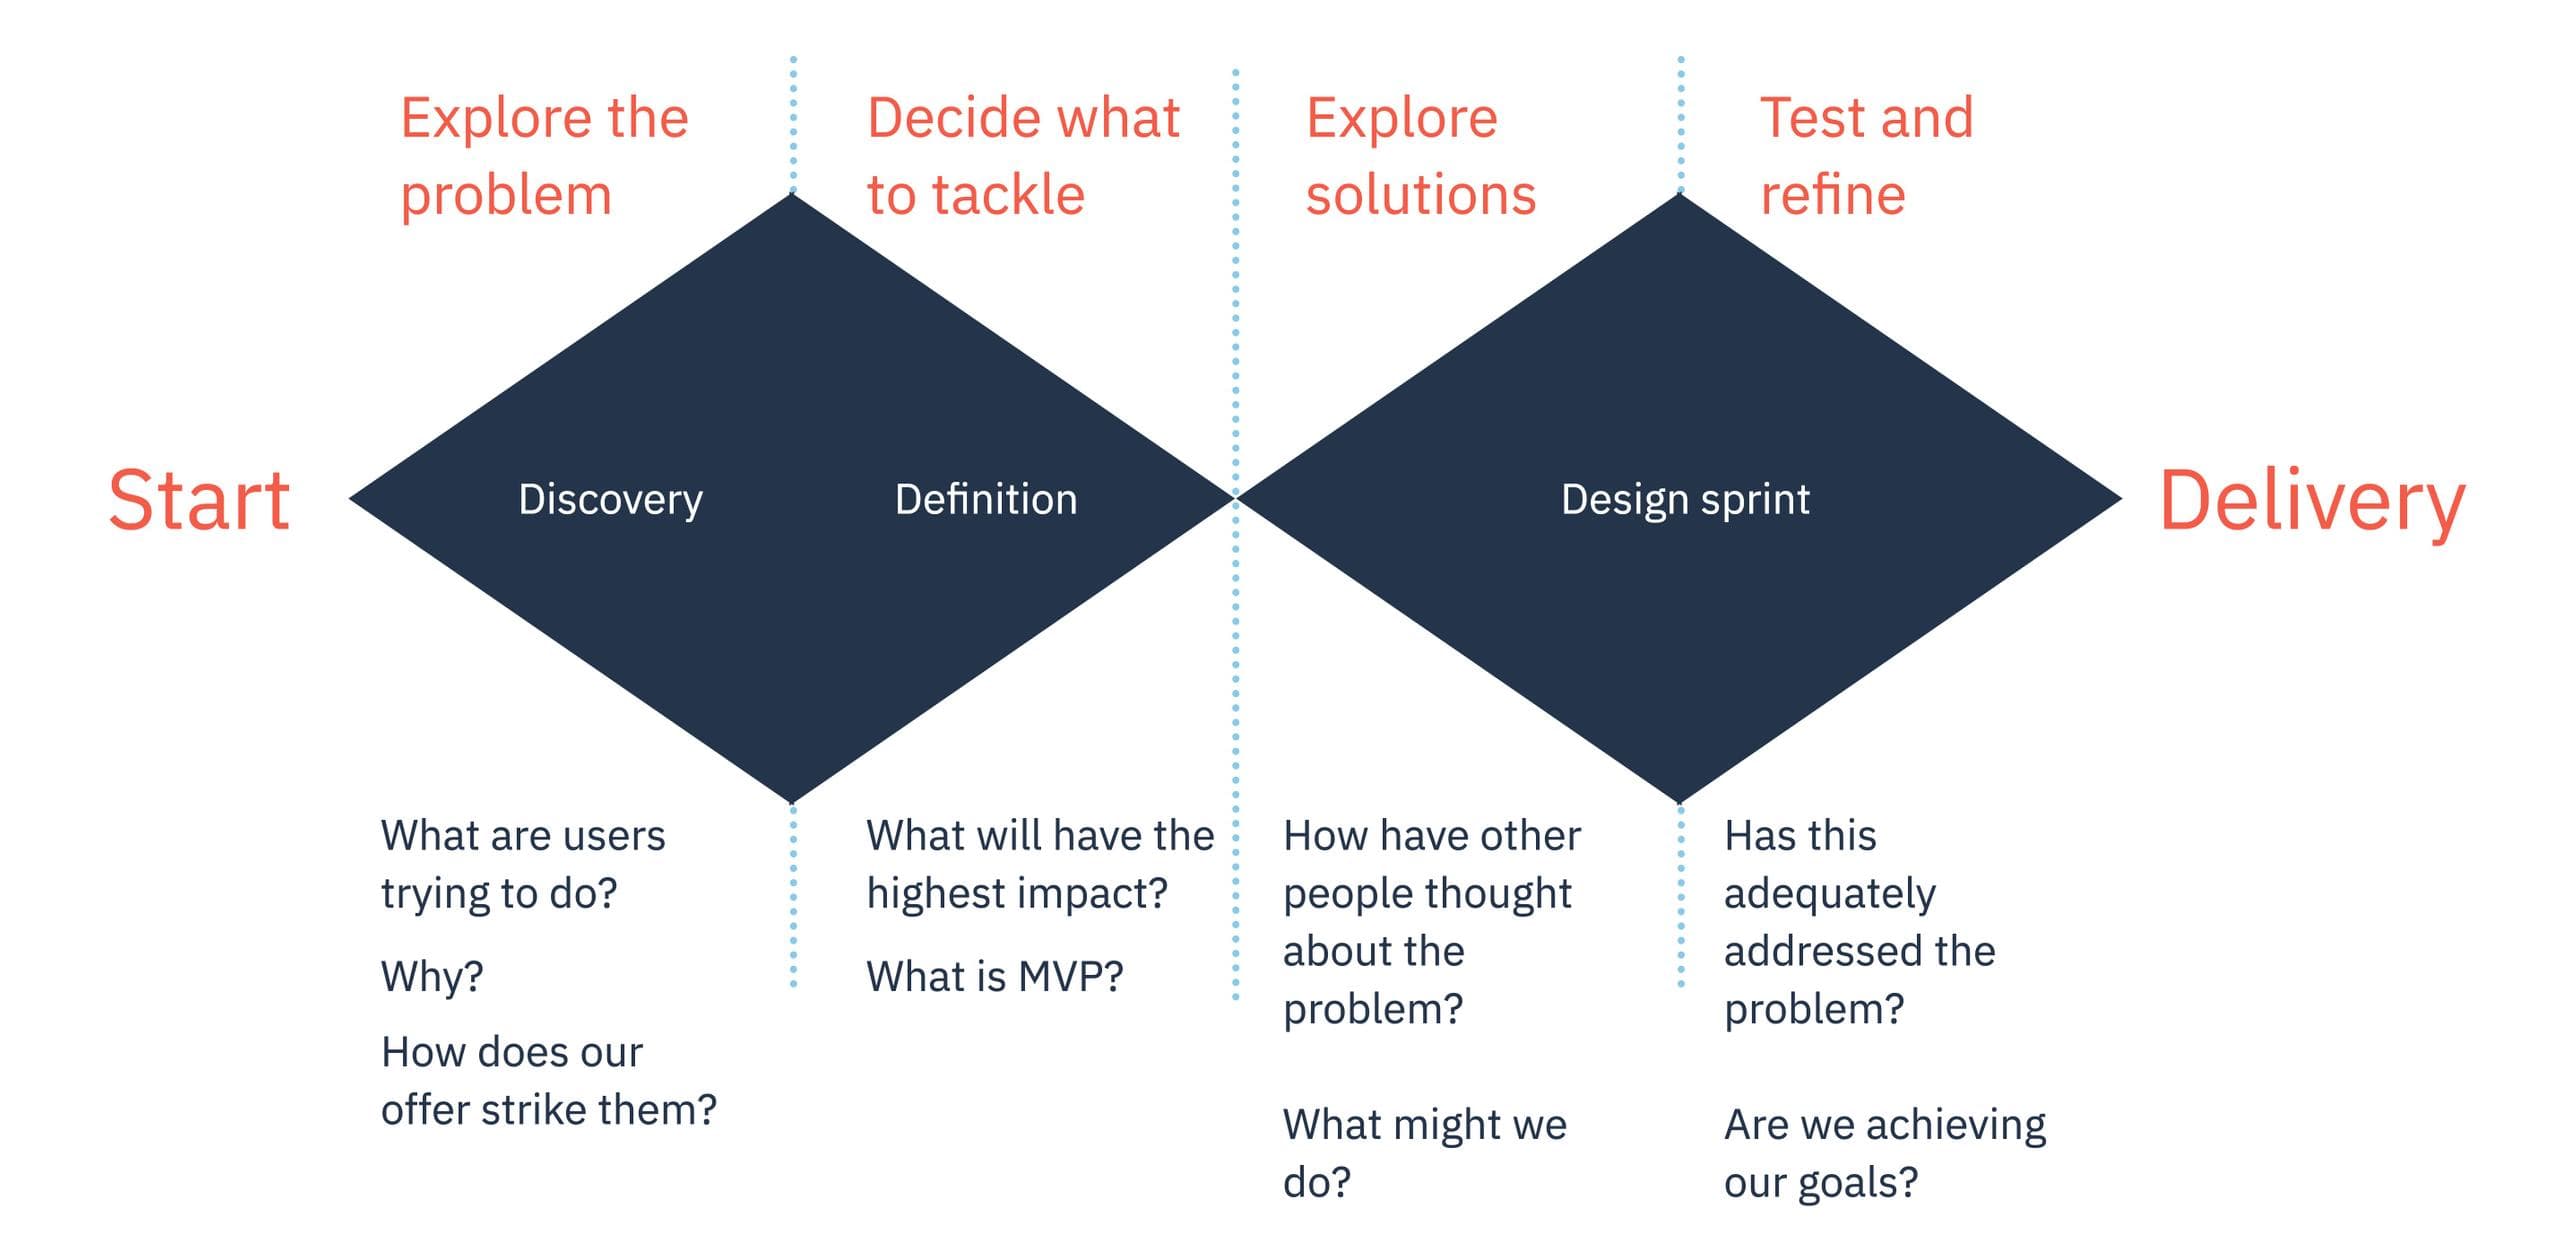 Double diamond diagram showing the following phases: Discovery, Define and Design Sprint within which we explore solutions, test and refine 